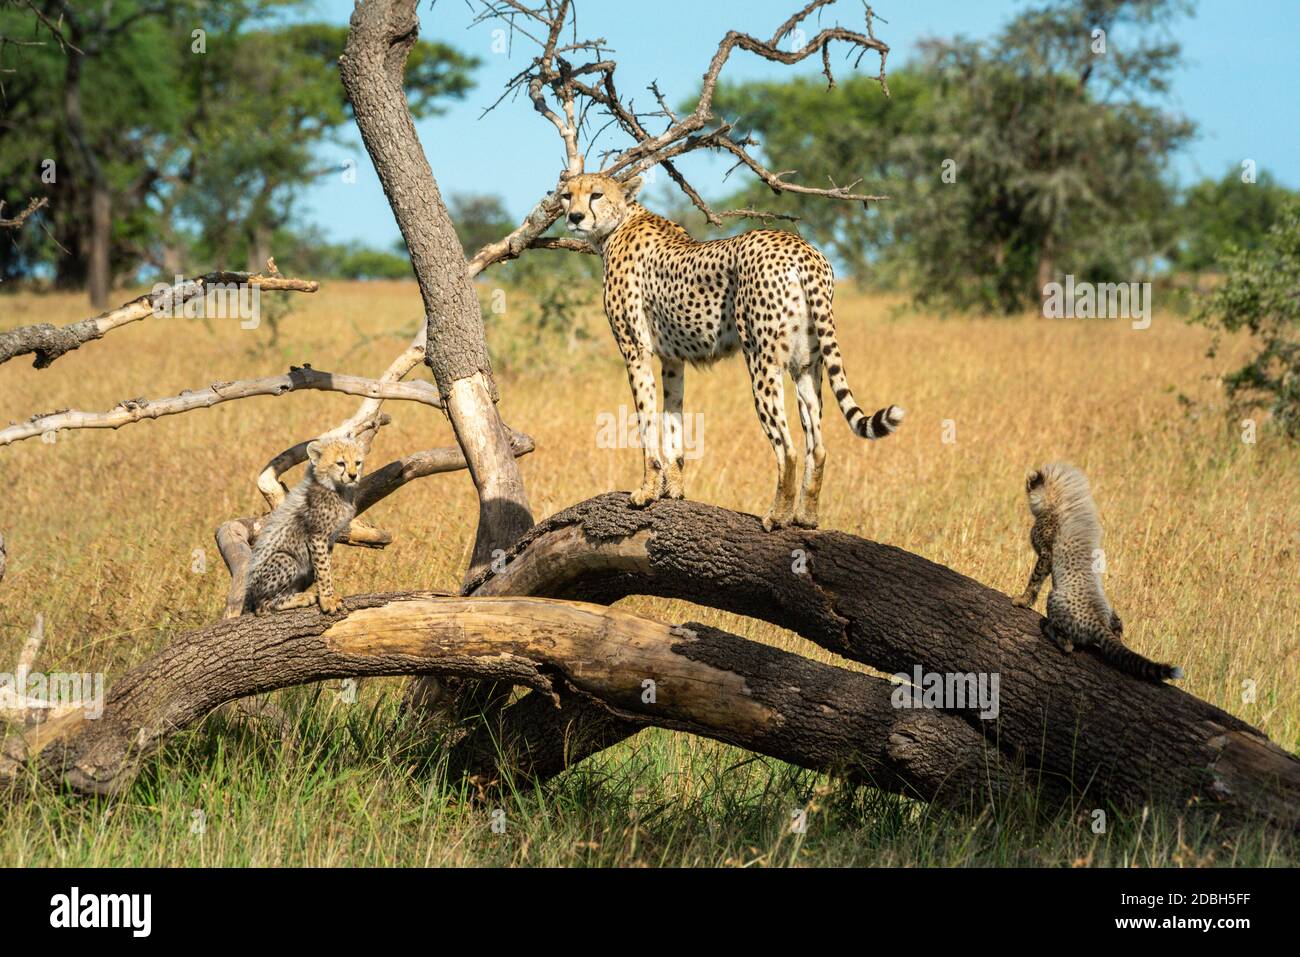 Cheetah stands on dead log by cubs Stock Photo